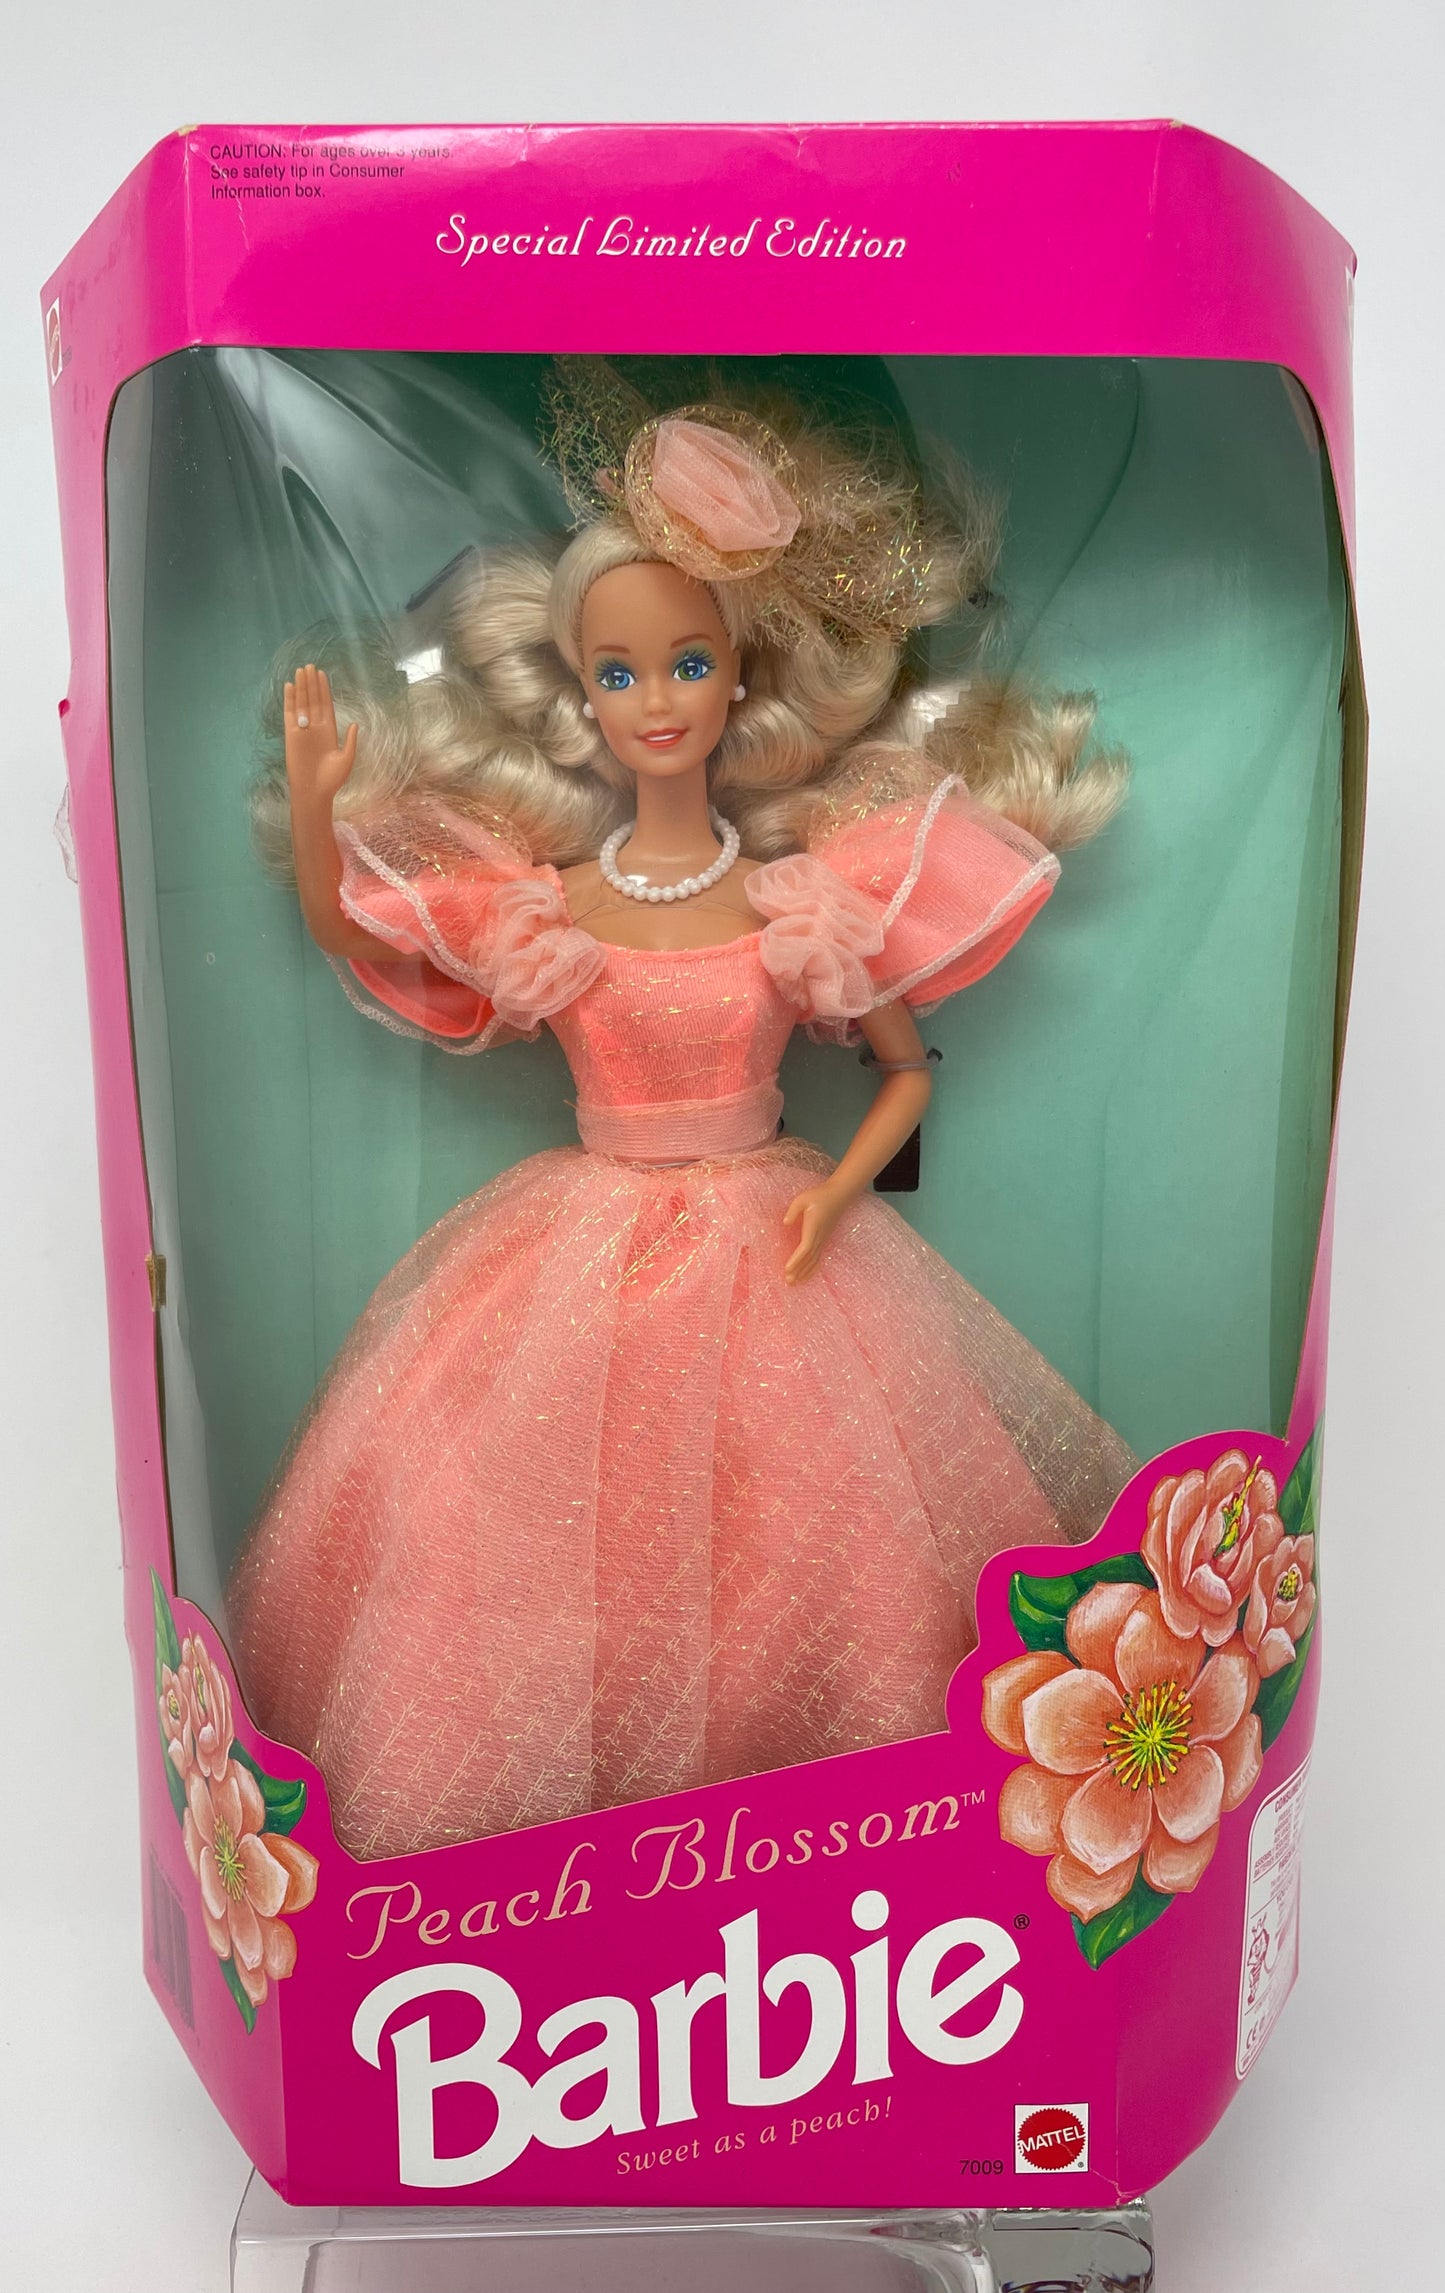 PEACH BLOSSOM BARBIE - SPECIAL LIMITED EDITION - #7009 - MATTEL 1992